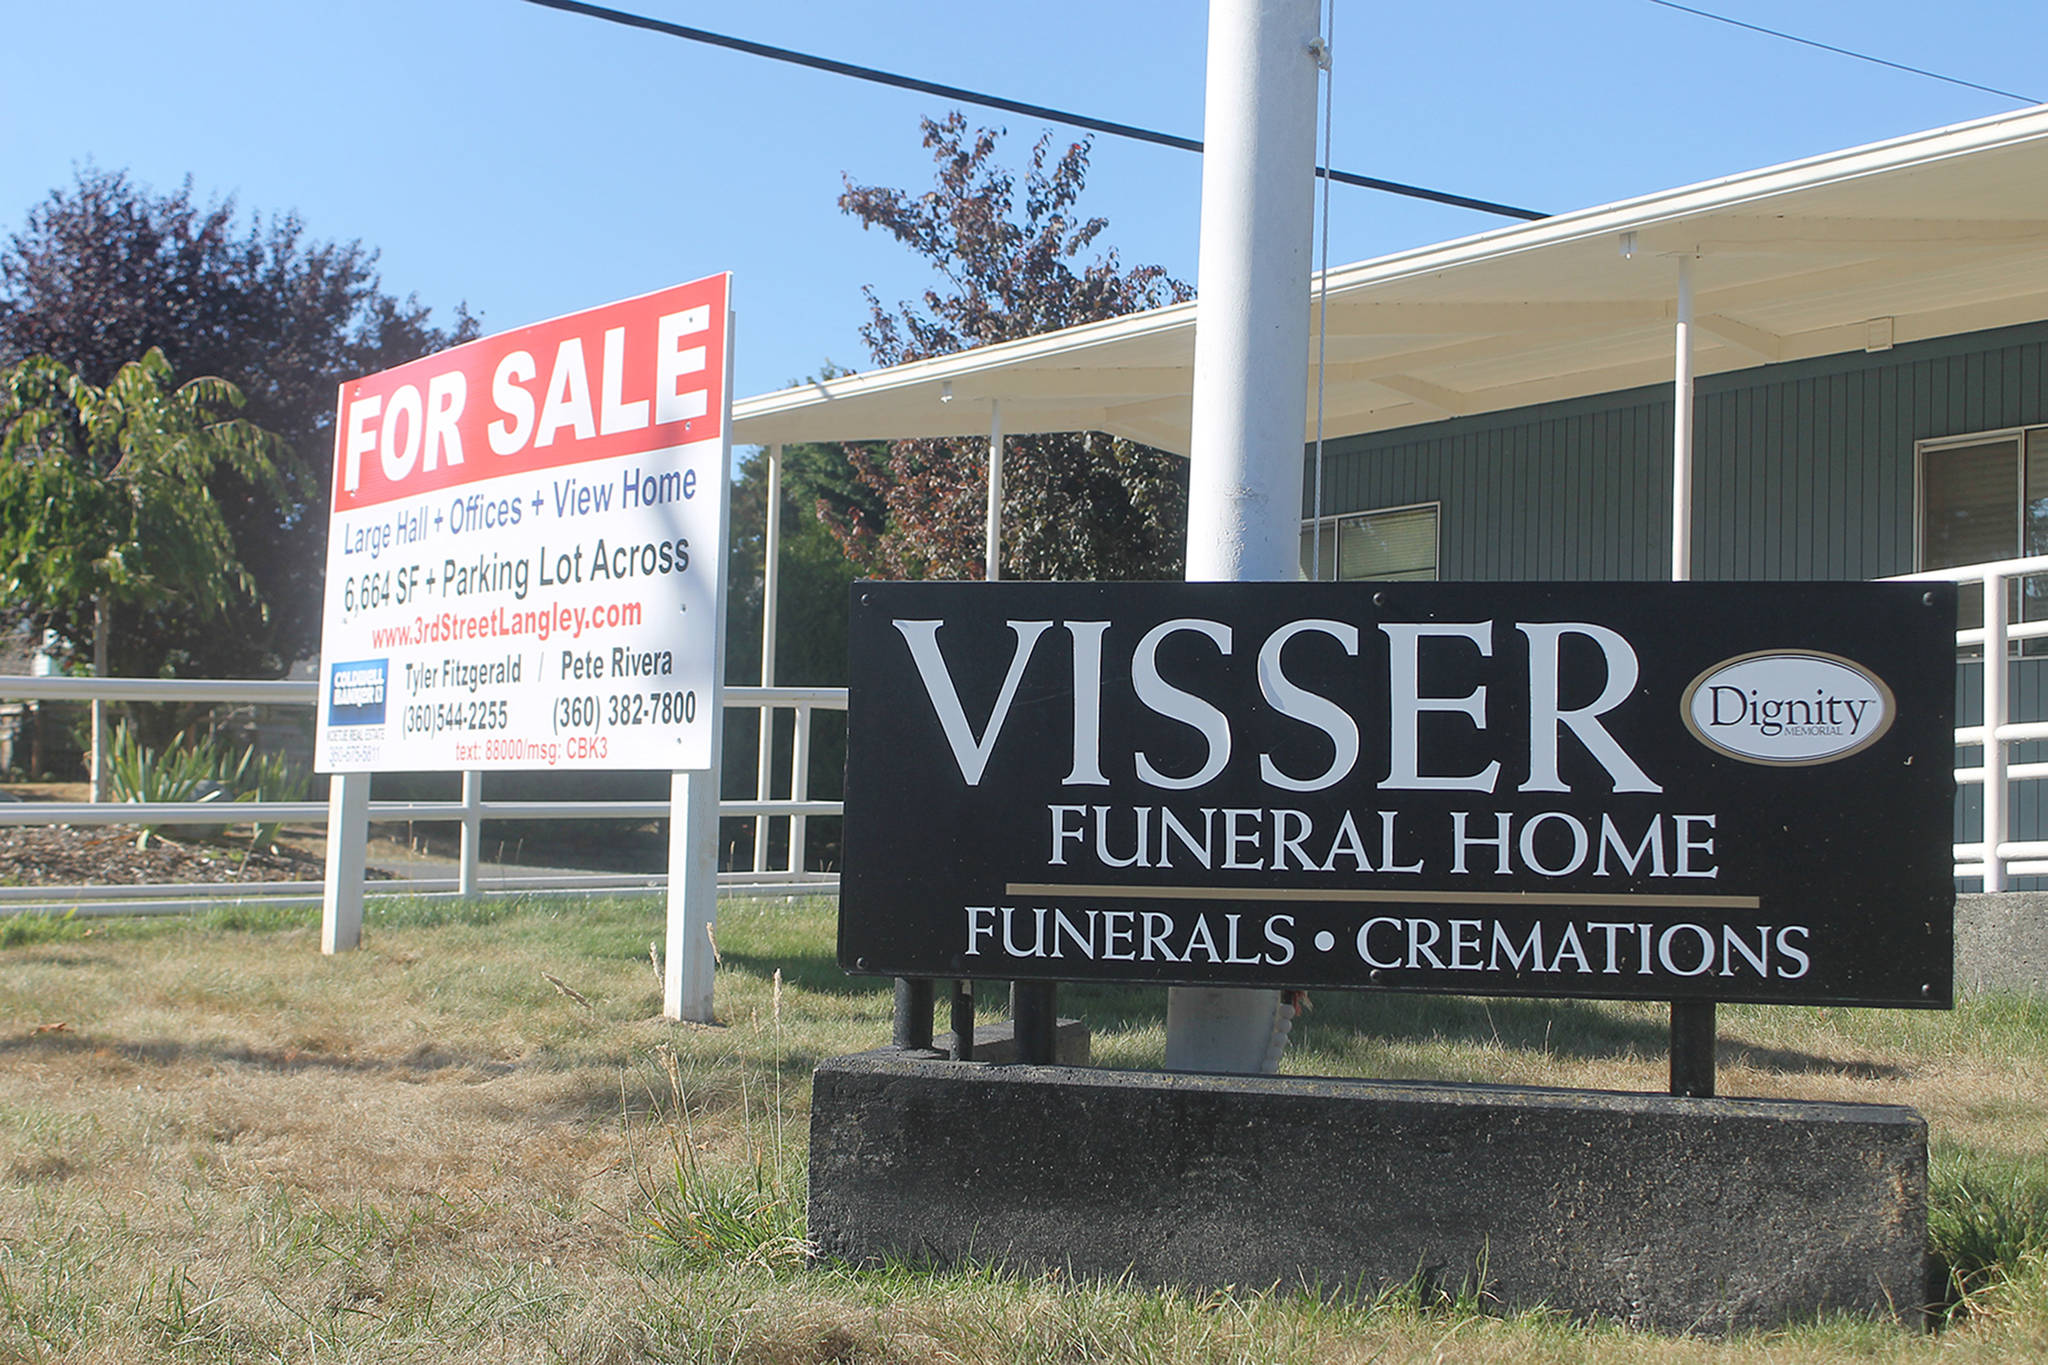 Funeral home loss worries police